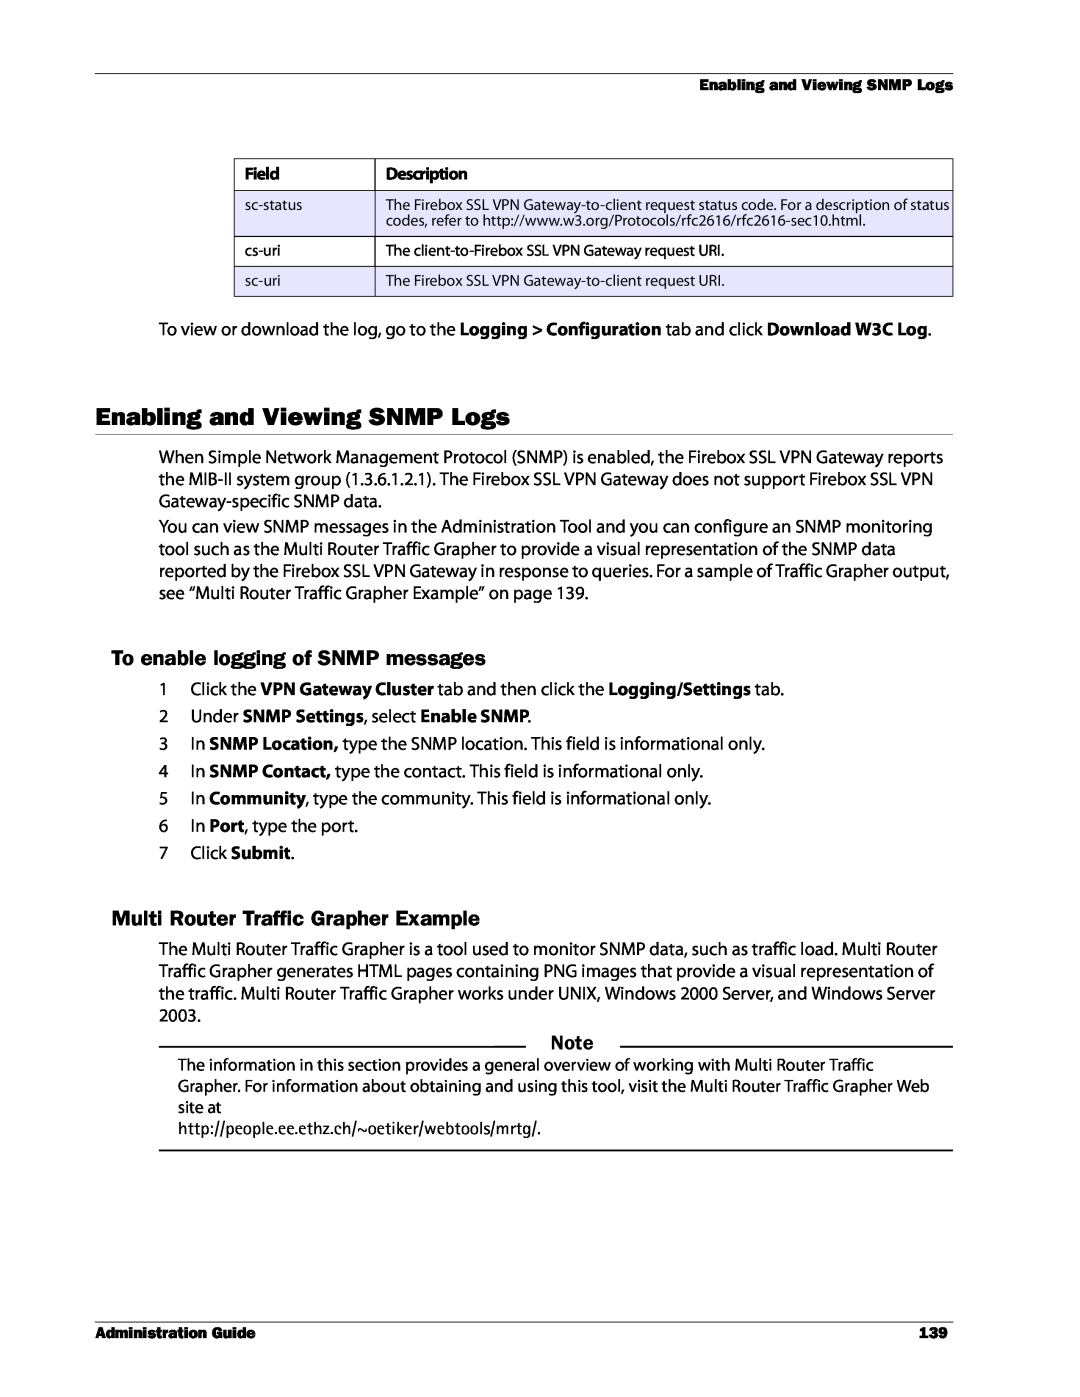 WatchGuard Technologies SSL VPN manual Enabling and Viewing SNMP Logs, To enable logging of SNMP messages 